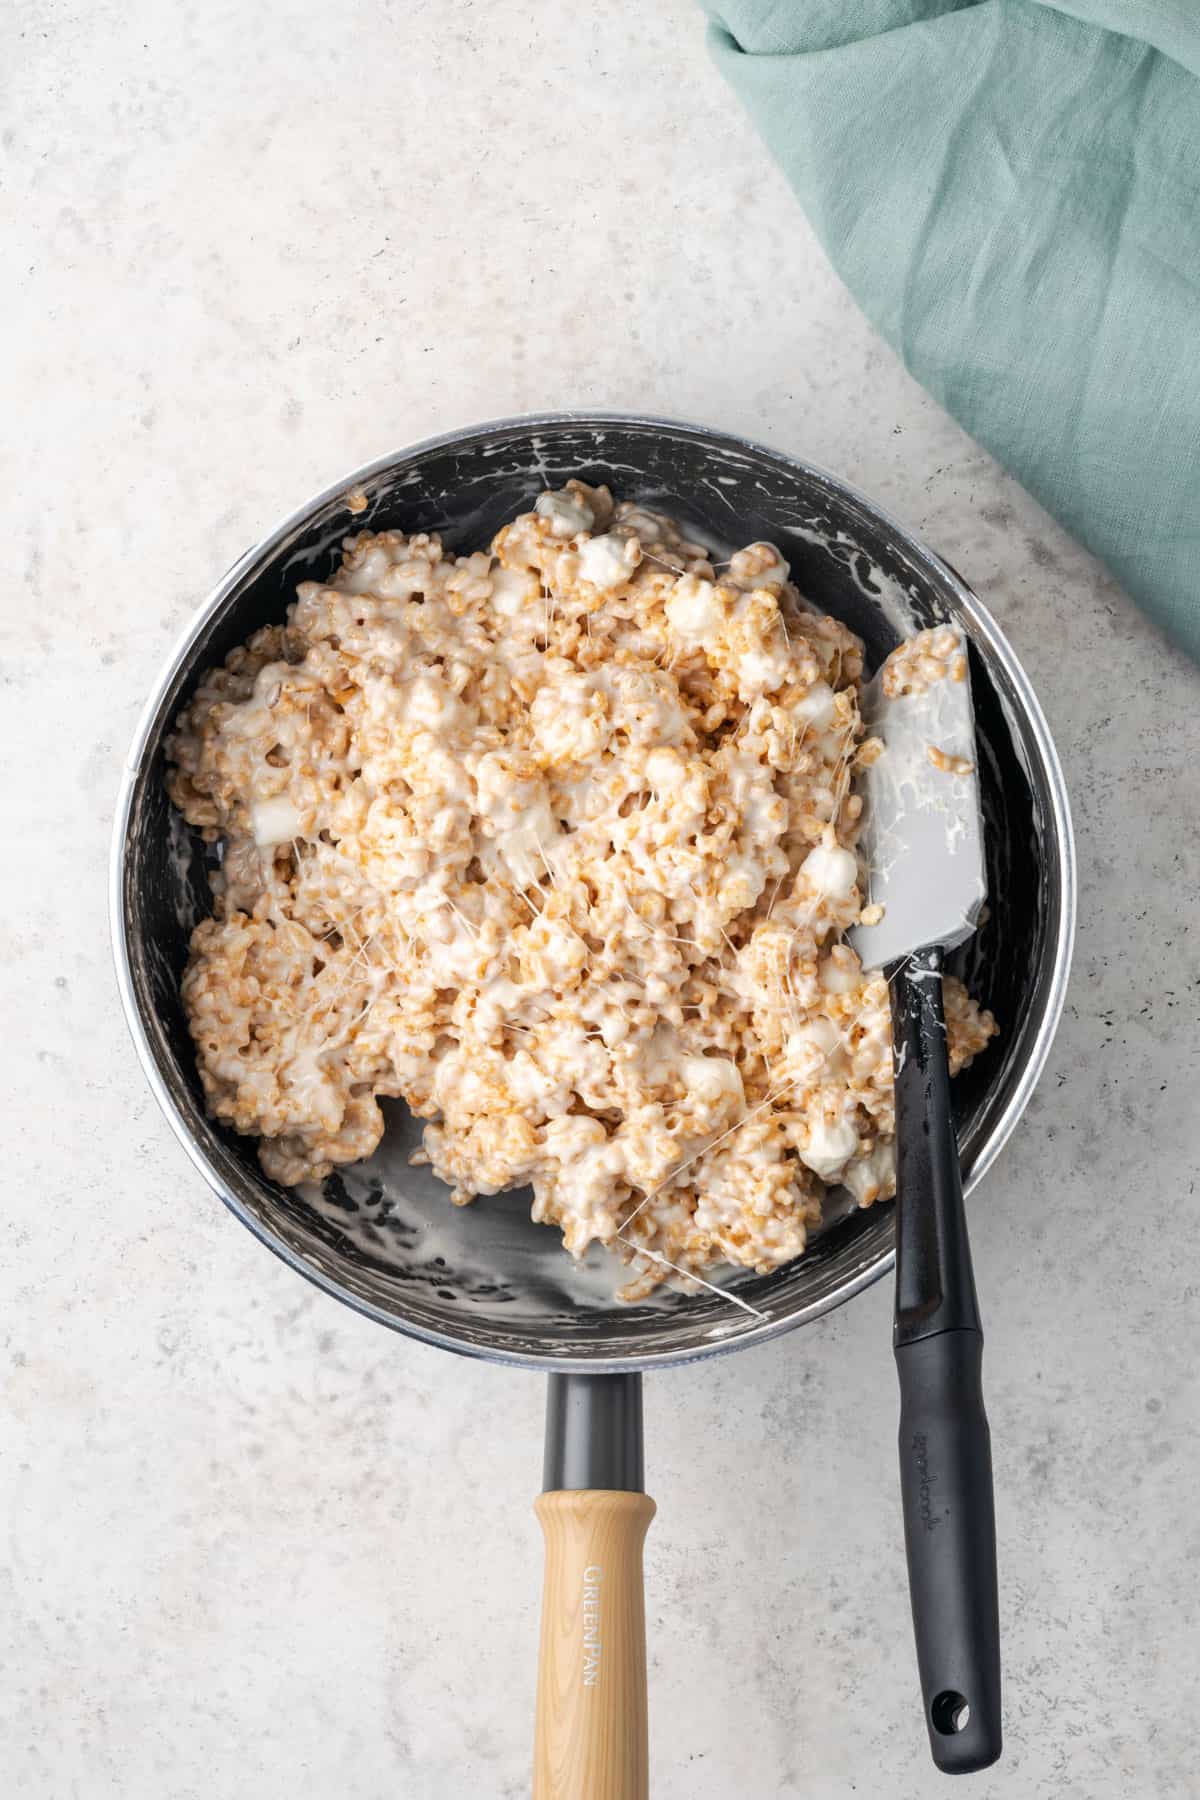 Mixed rice krispie treat batter in a large saucepan.